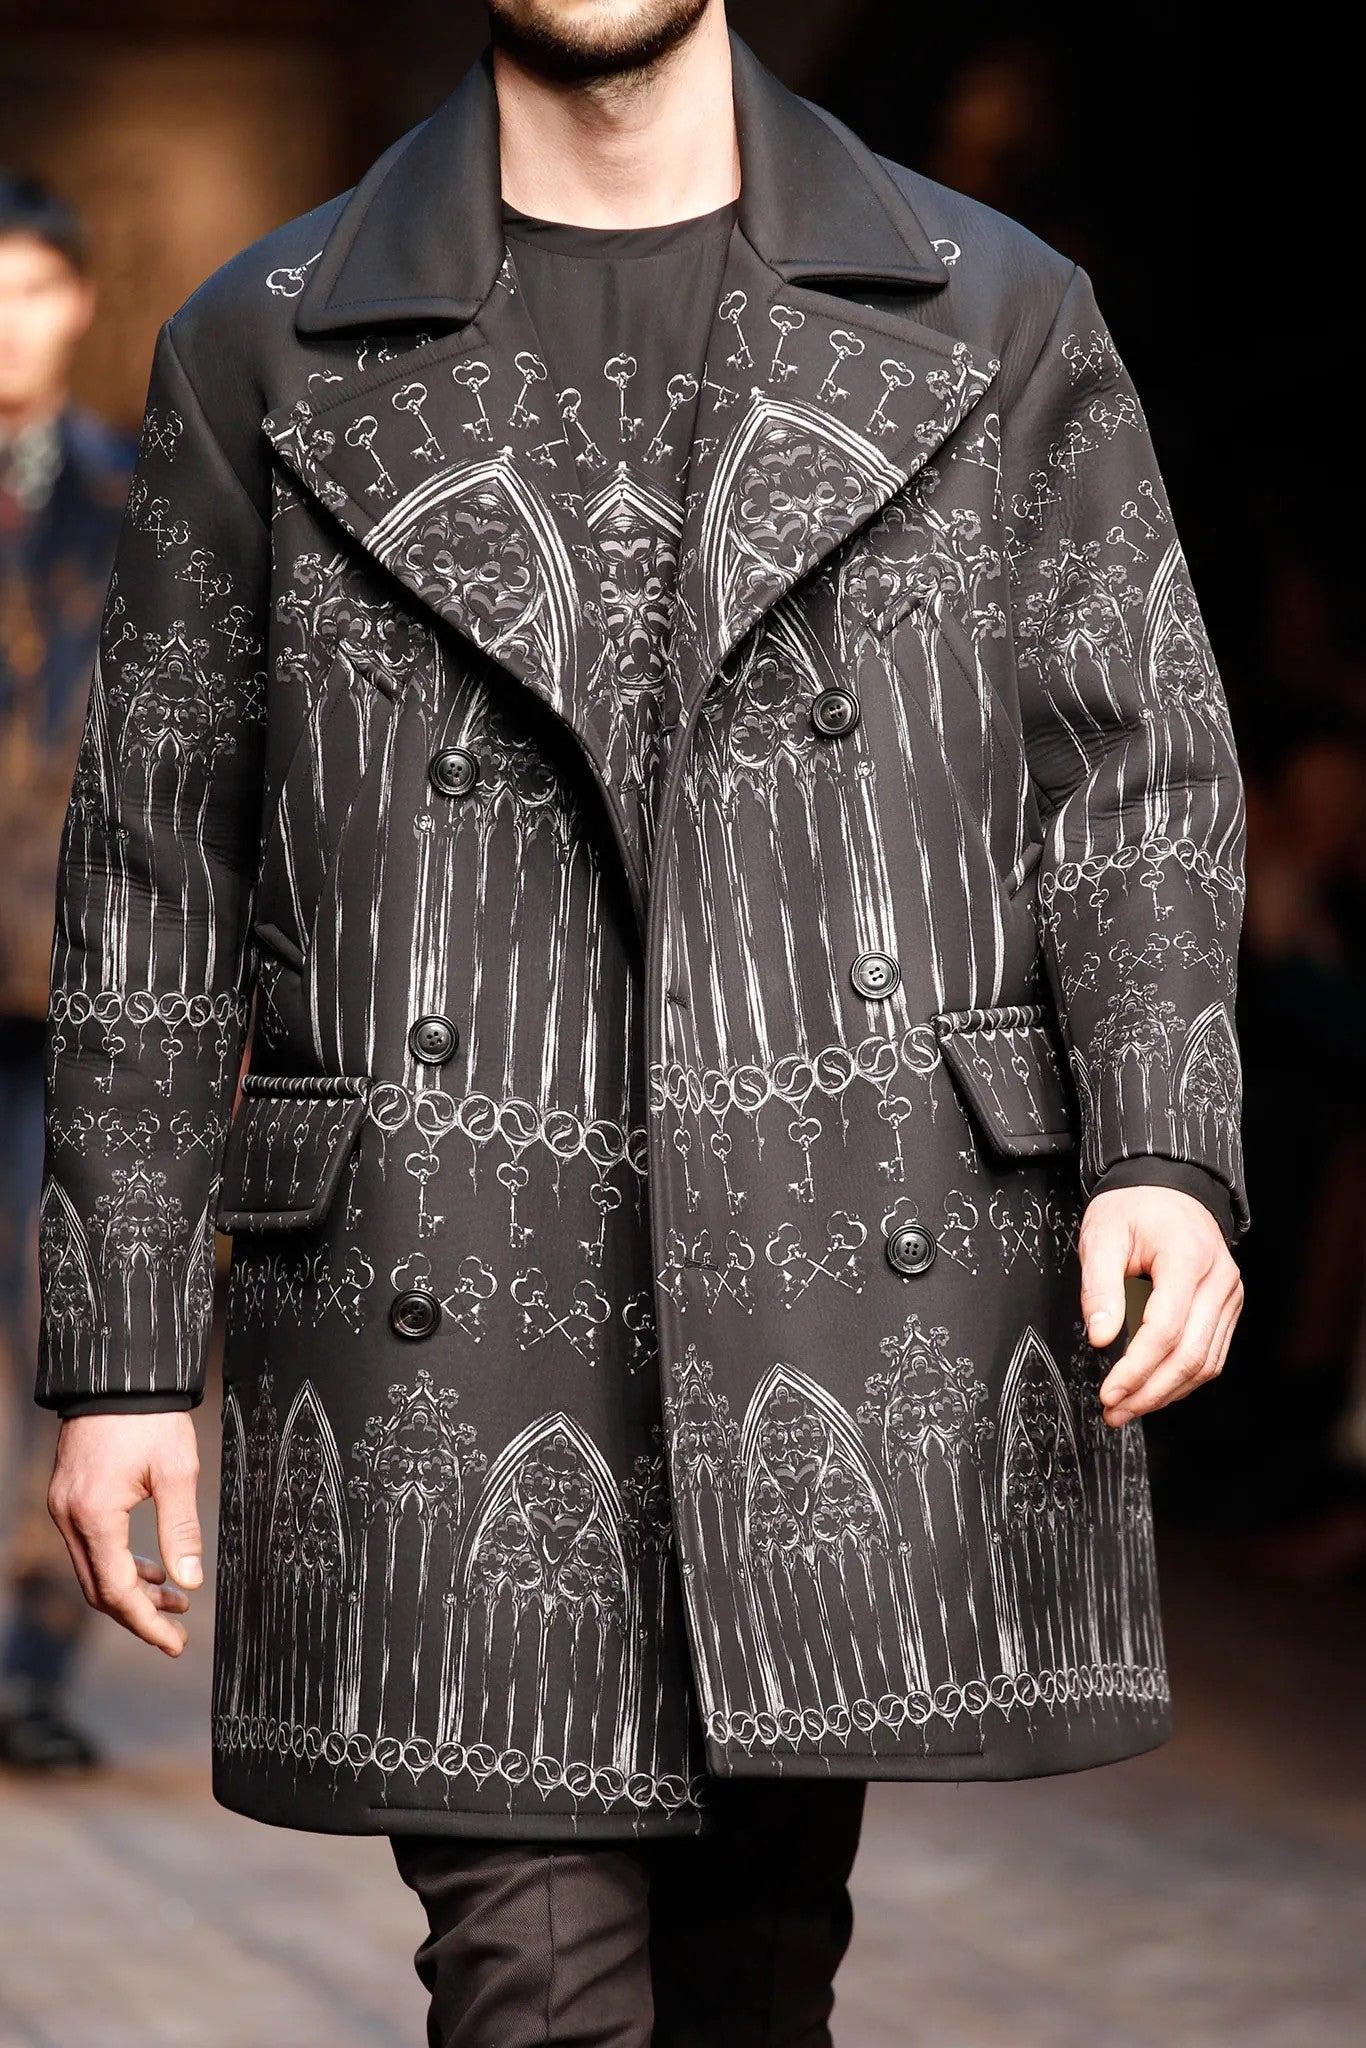 DOLCE & GABBANA Fall 2014 'Norman Kings Collection' Cathedral print heavy coat comes in a black & white wool / silk with a full liner featuring a large lapel, flap pockets, and a double breasted closure. Comes with tags. Made in Italy.
Very Good